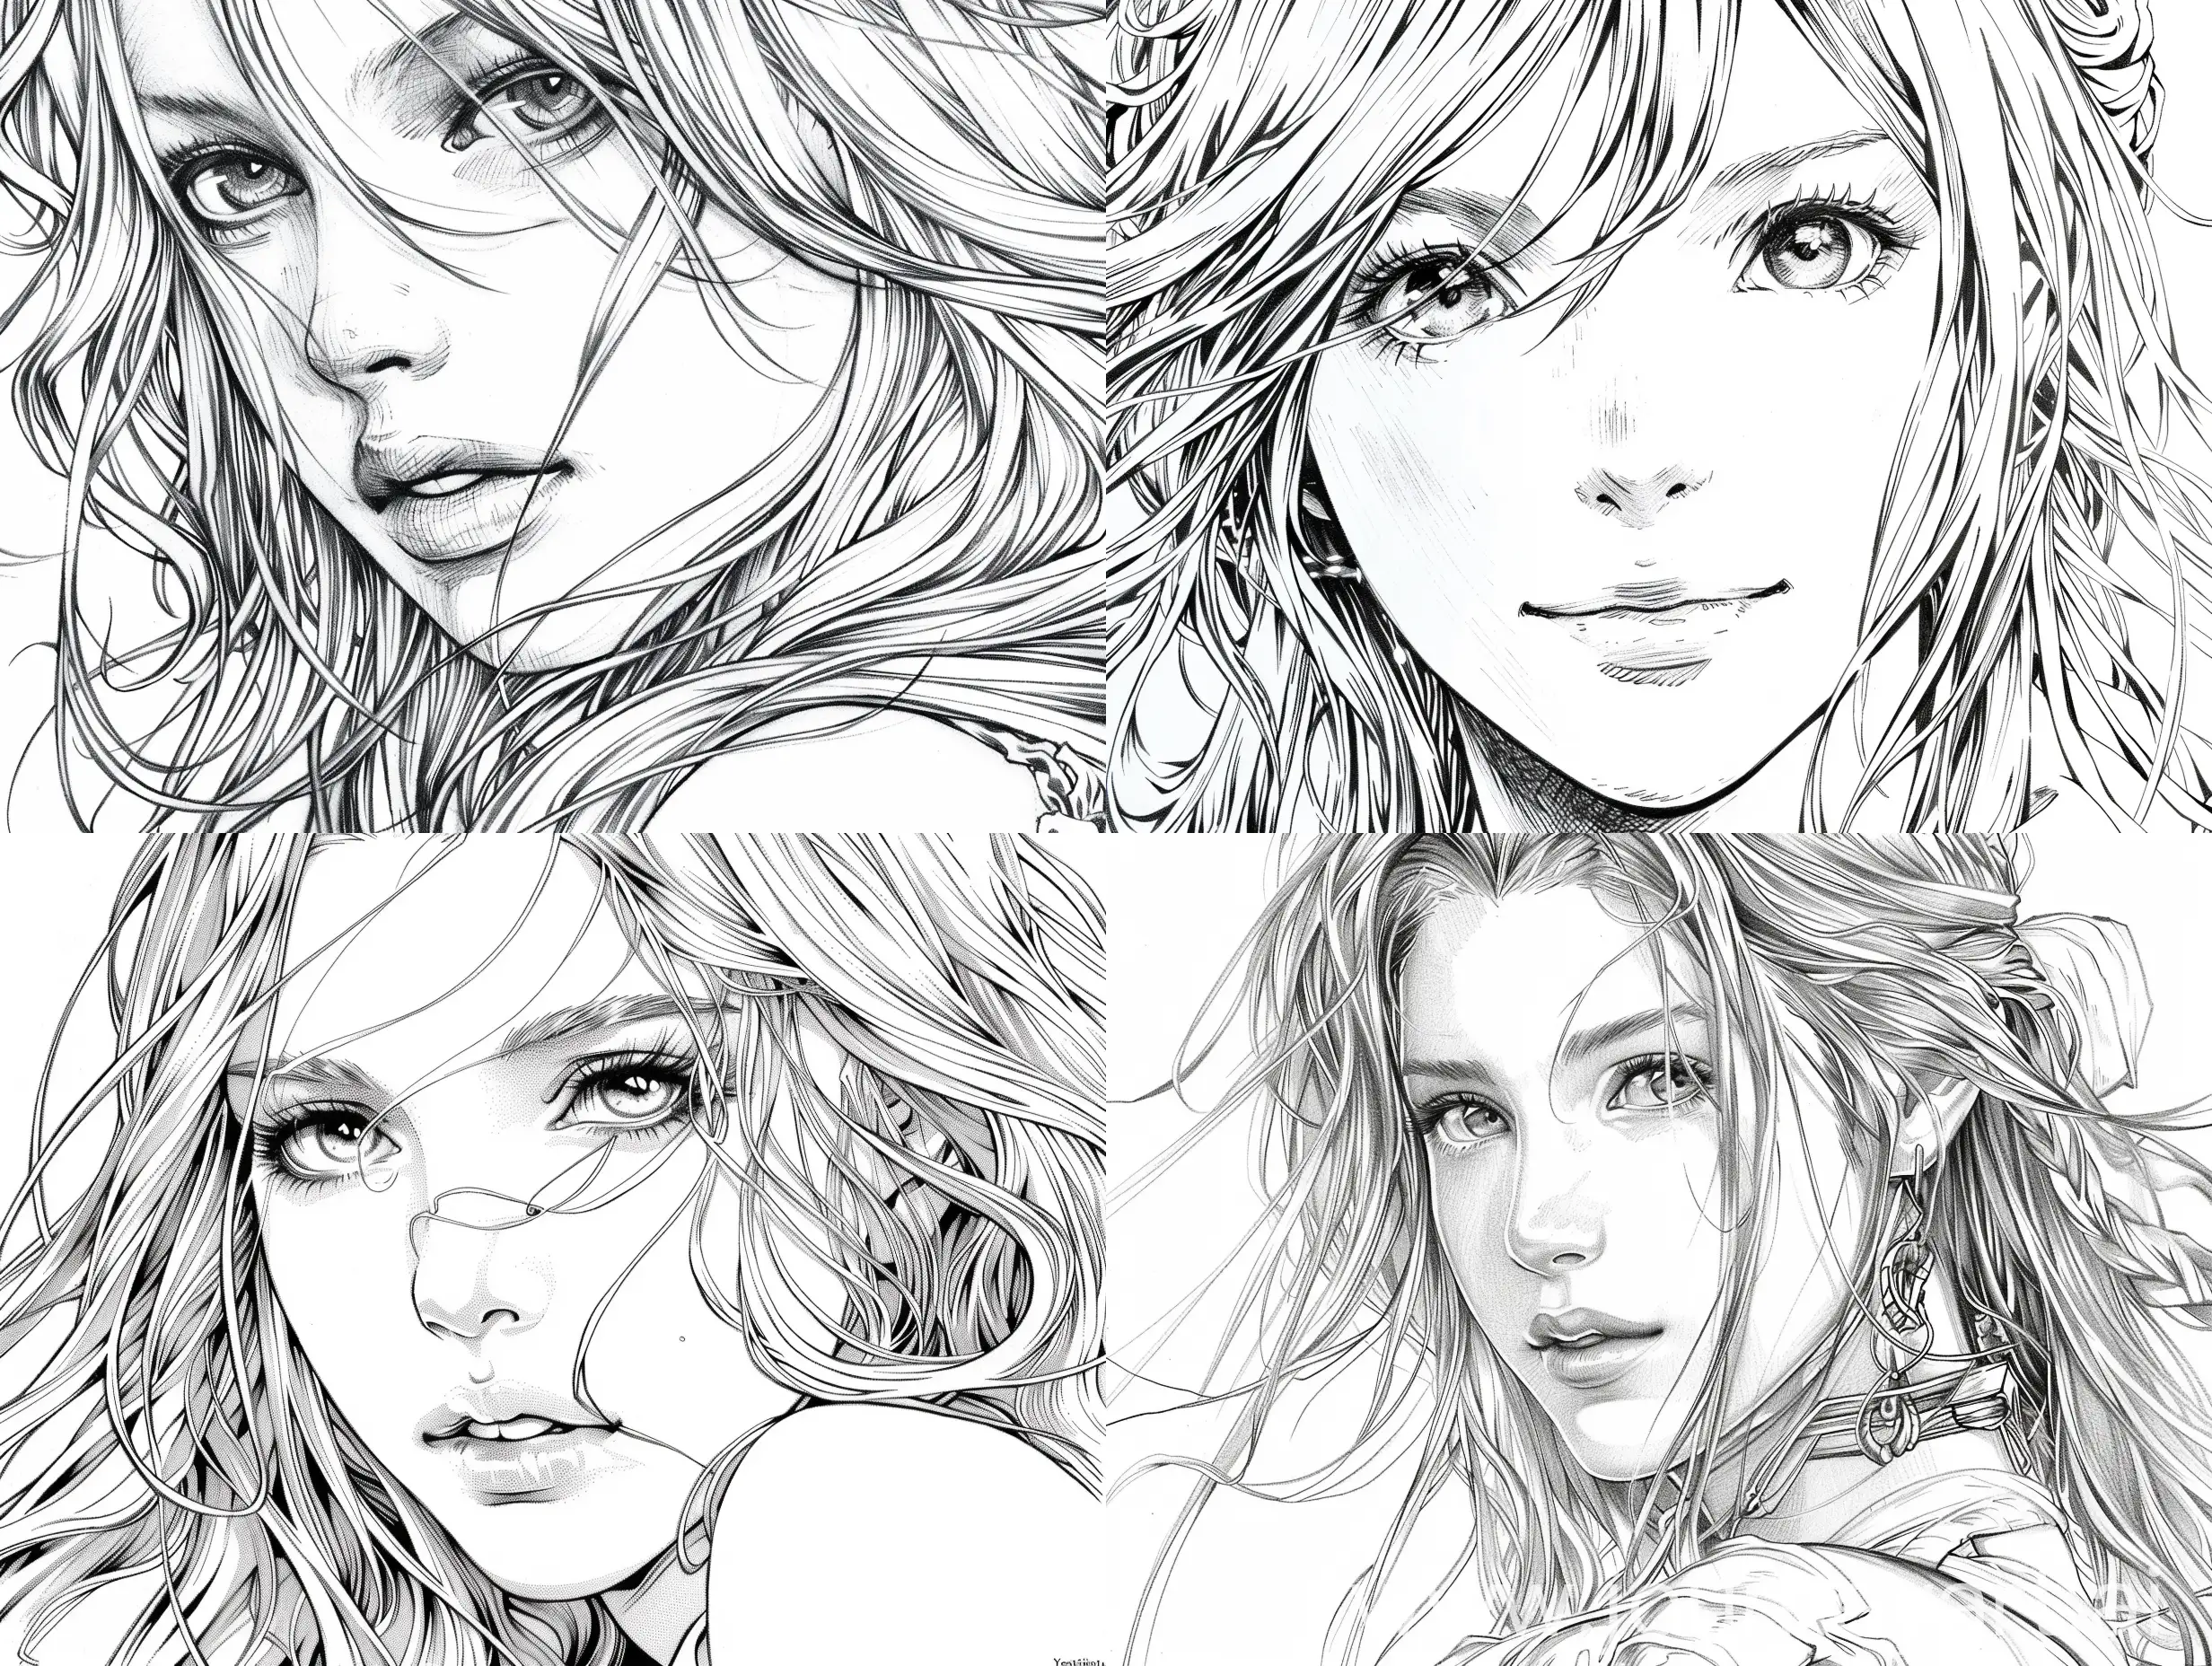 Detailed-Line-Art-of-a-Beautiful-Realistic-Girl-in-Final-Fantasy-Style